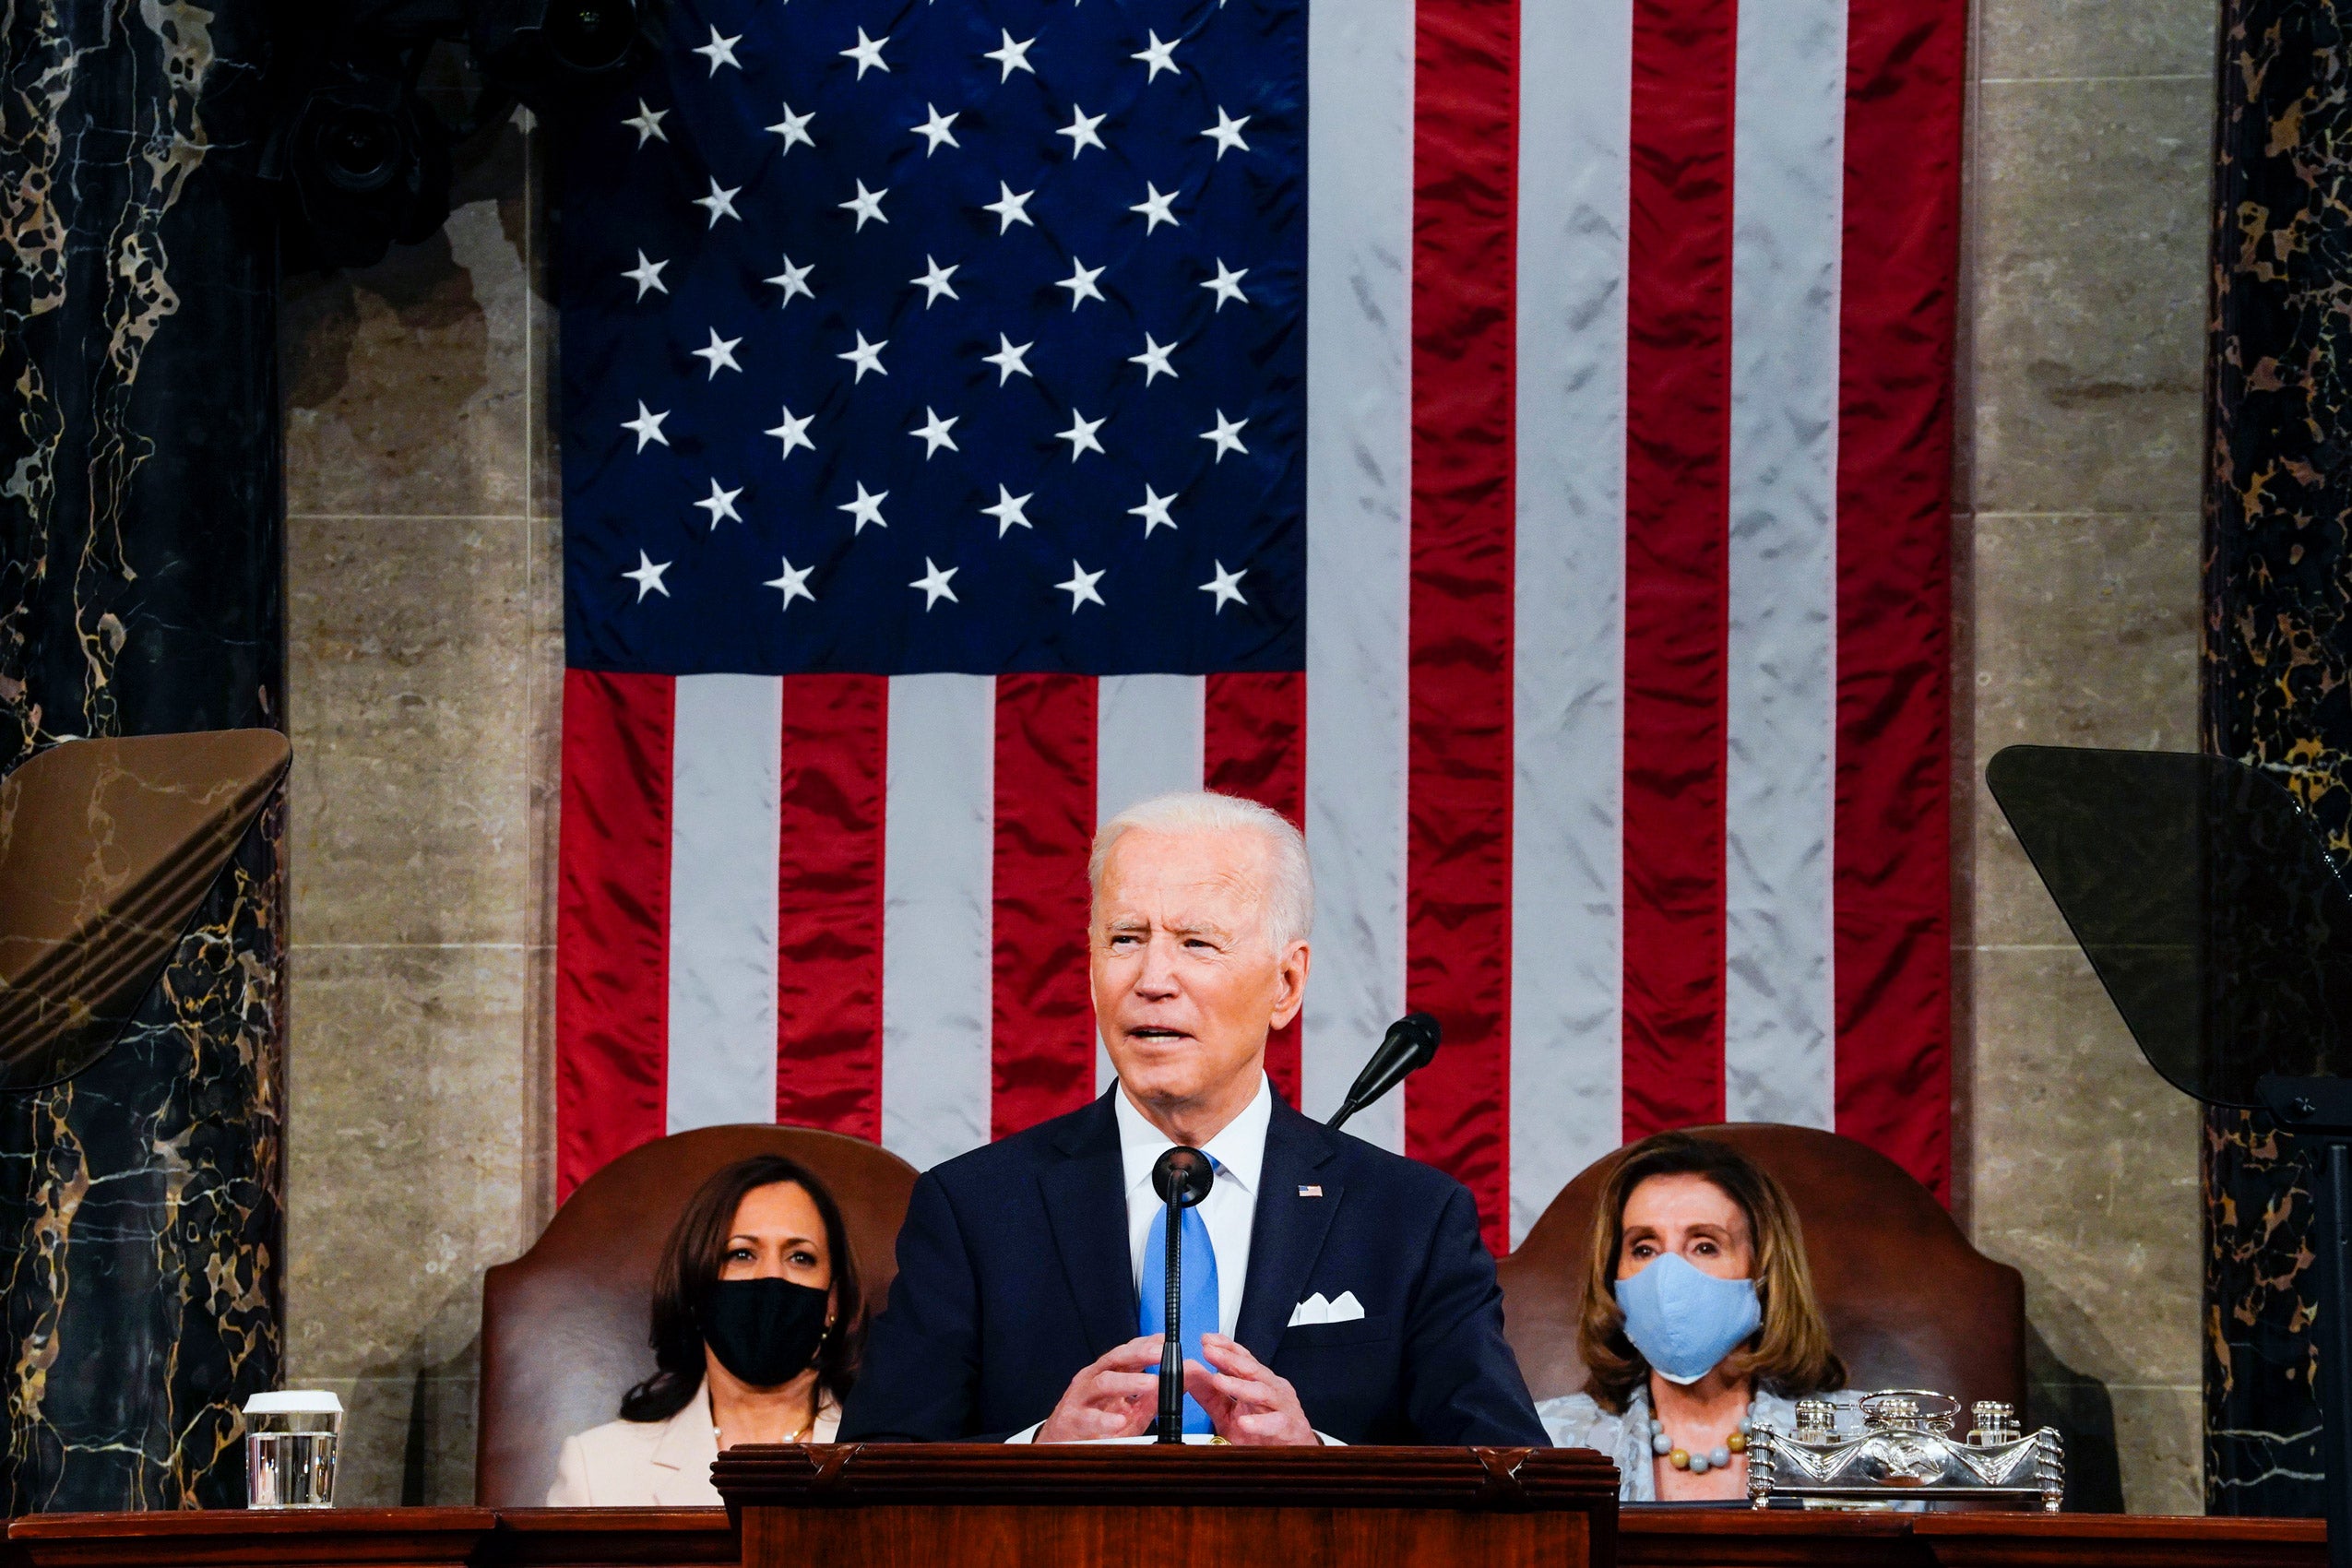 American flag on the wall in the background; President Joe Biden at a podium with Vice President Kamala Harris and House Speaker Nancy Pelosi sitting behind him.